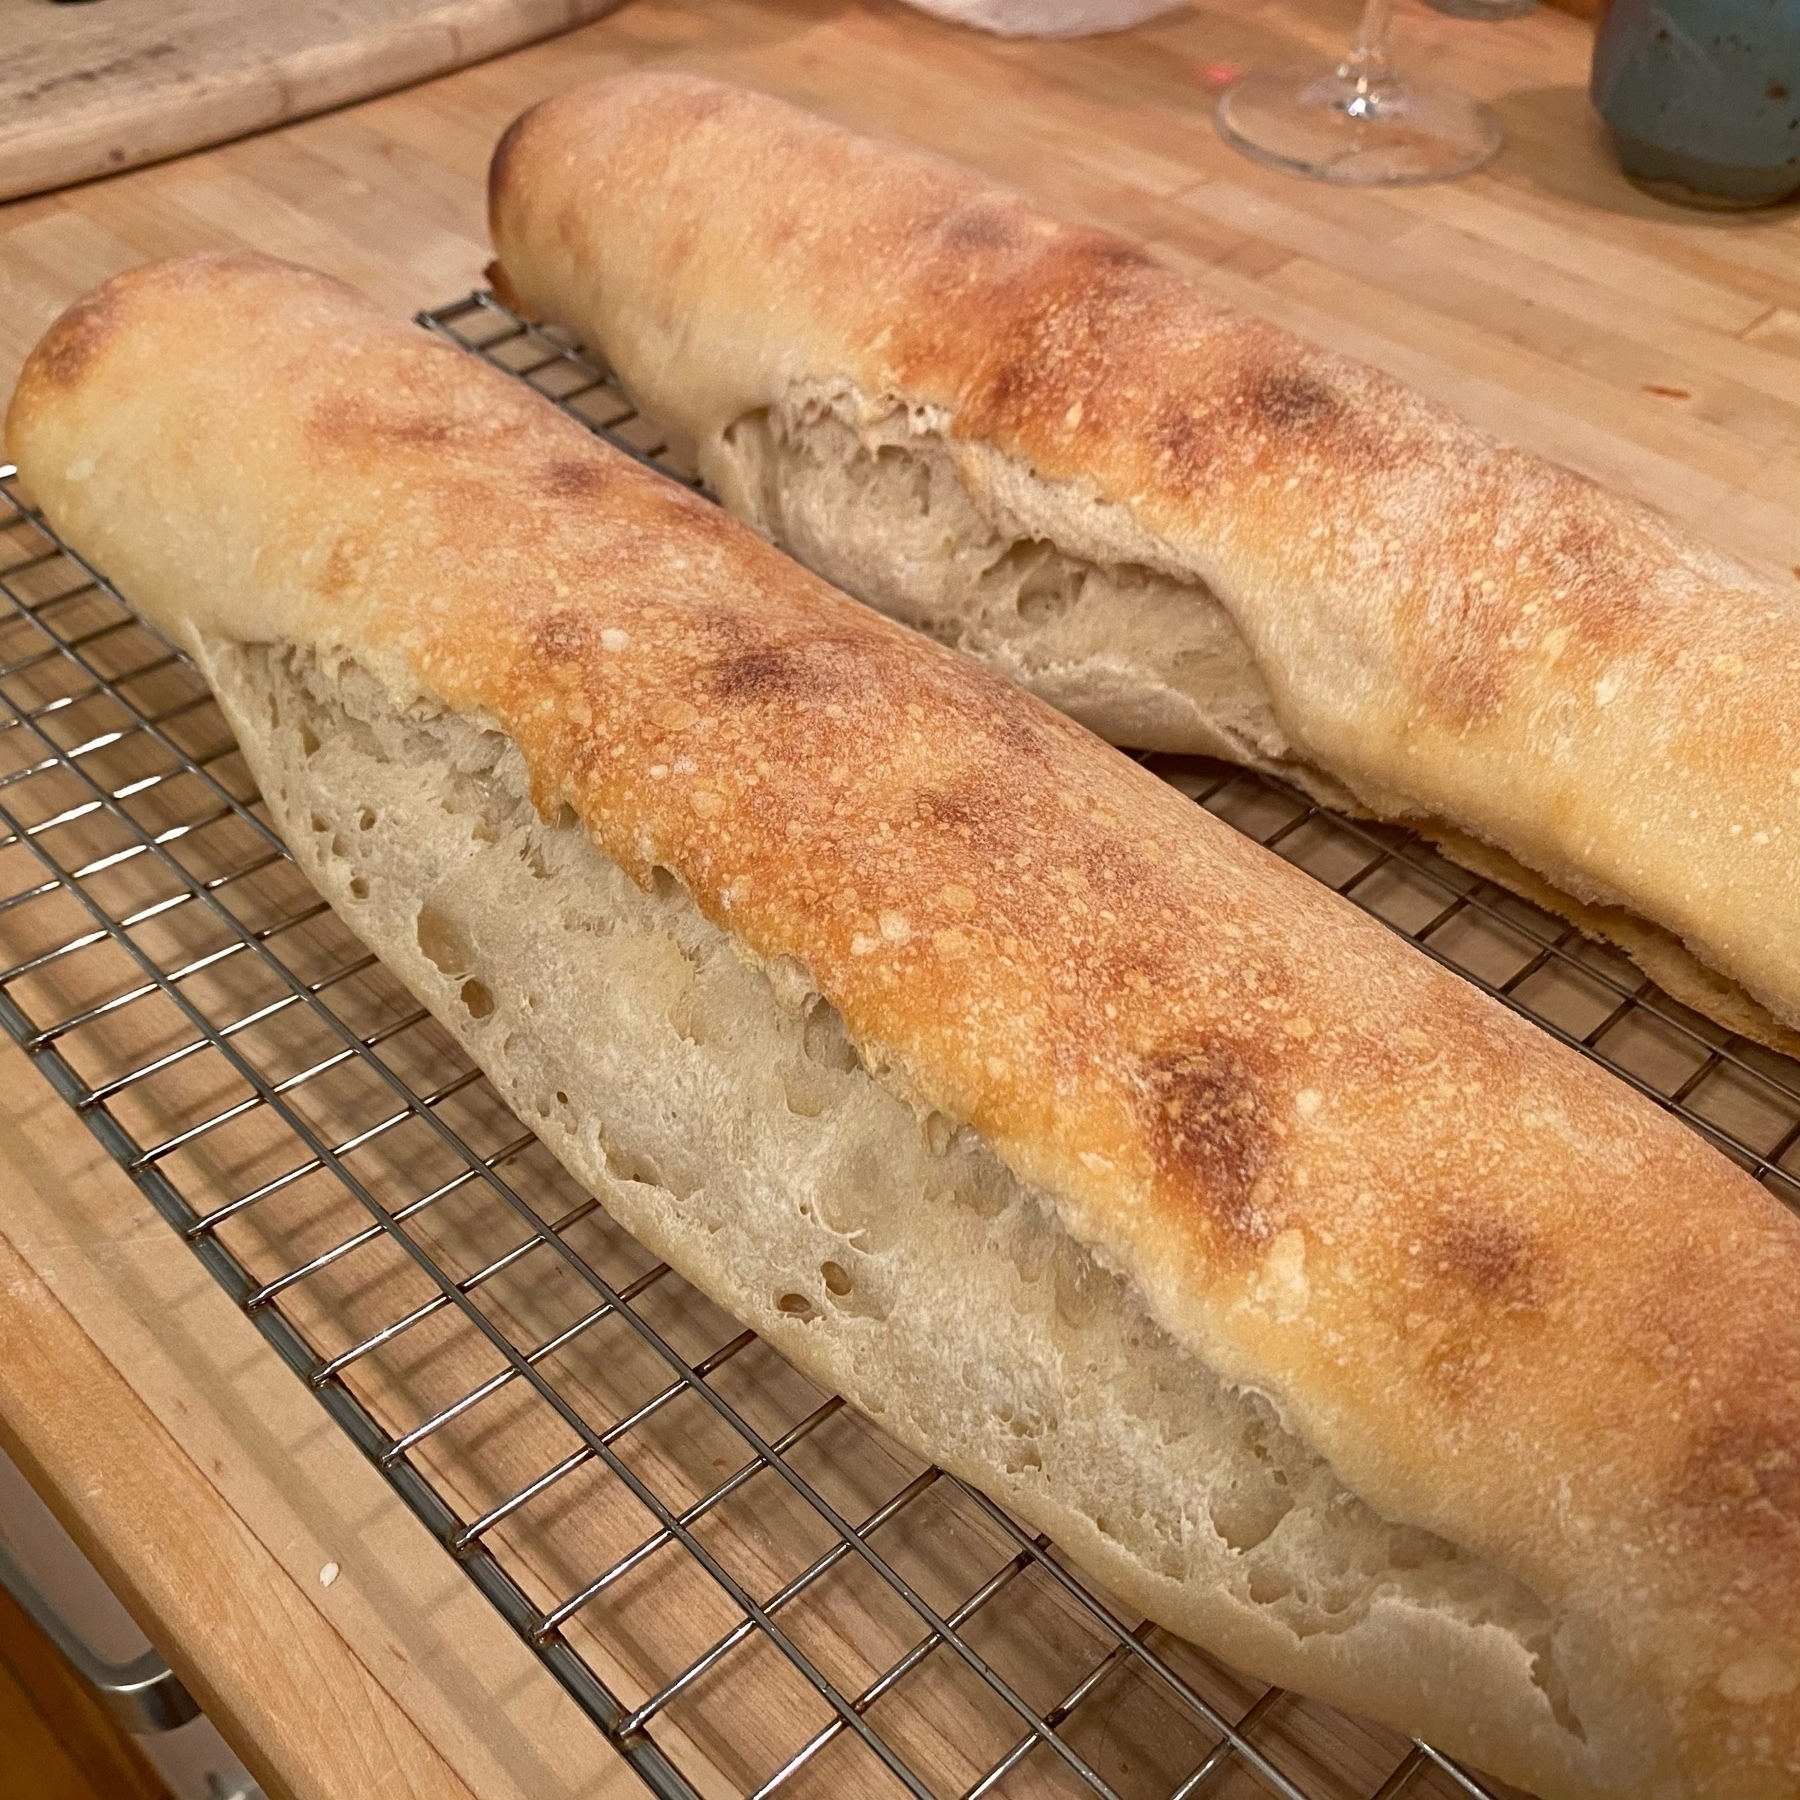 two baguettes with ruptured sides